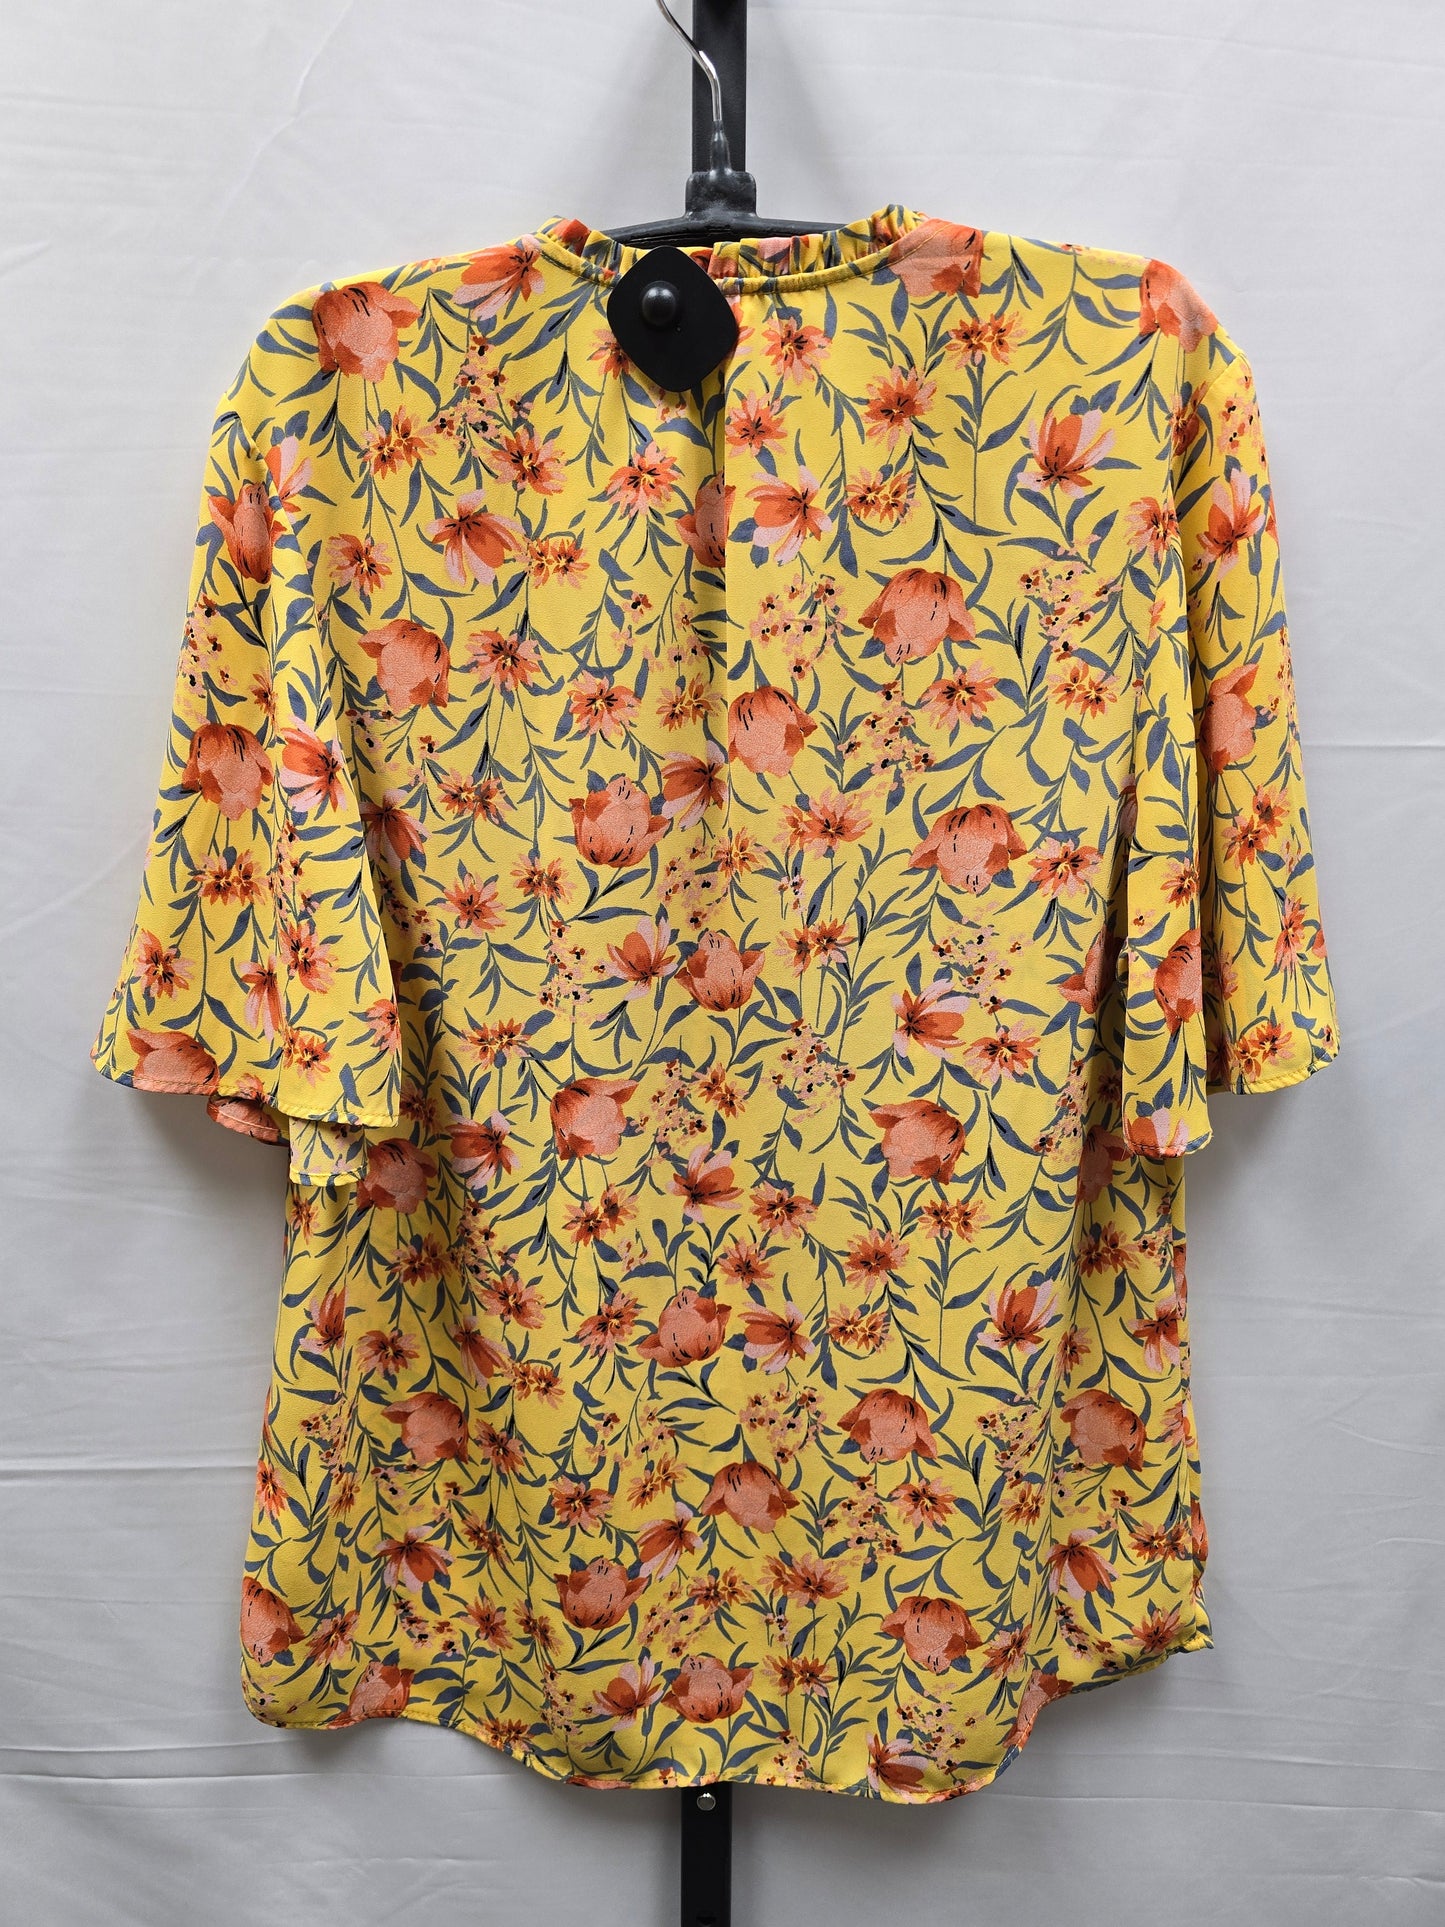 Yellow Top Short Sleeve Dr2, Size M